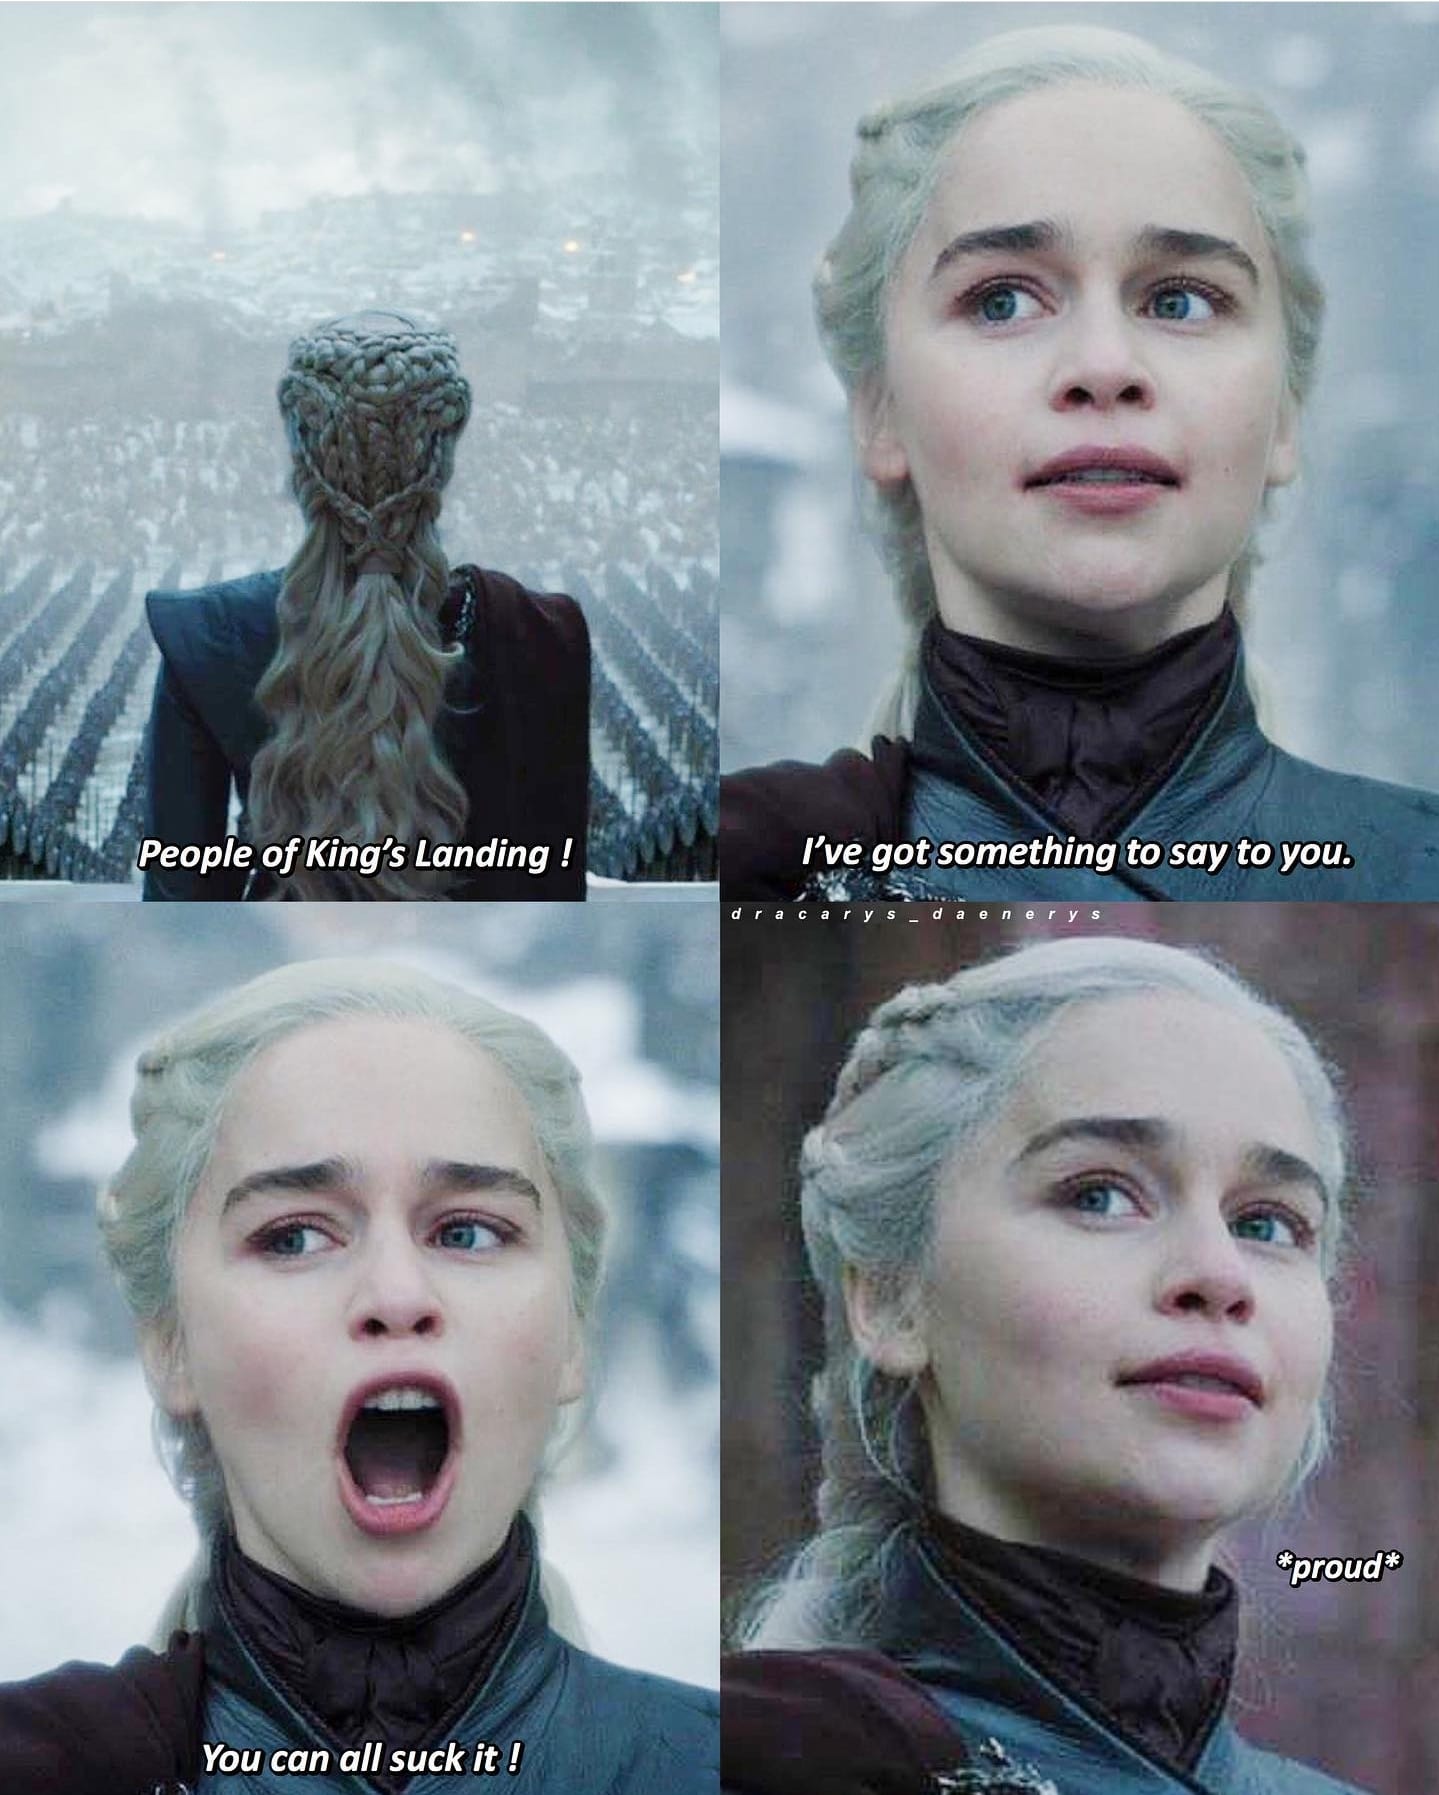 Game of thrones, Dothraki, Landing, King, No, Jon Game of thrones memes Game of thrones, Dothraki, Landing, King, No, Jon text: People of King's Landing ! I've got something to say to you. d r acar y s *proud* You can all suck it ! 